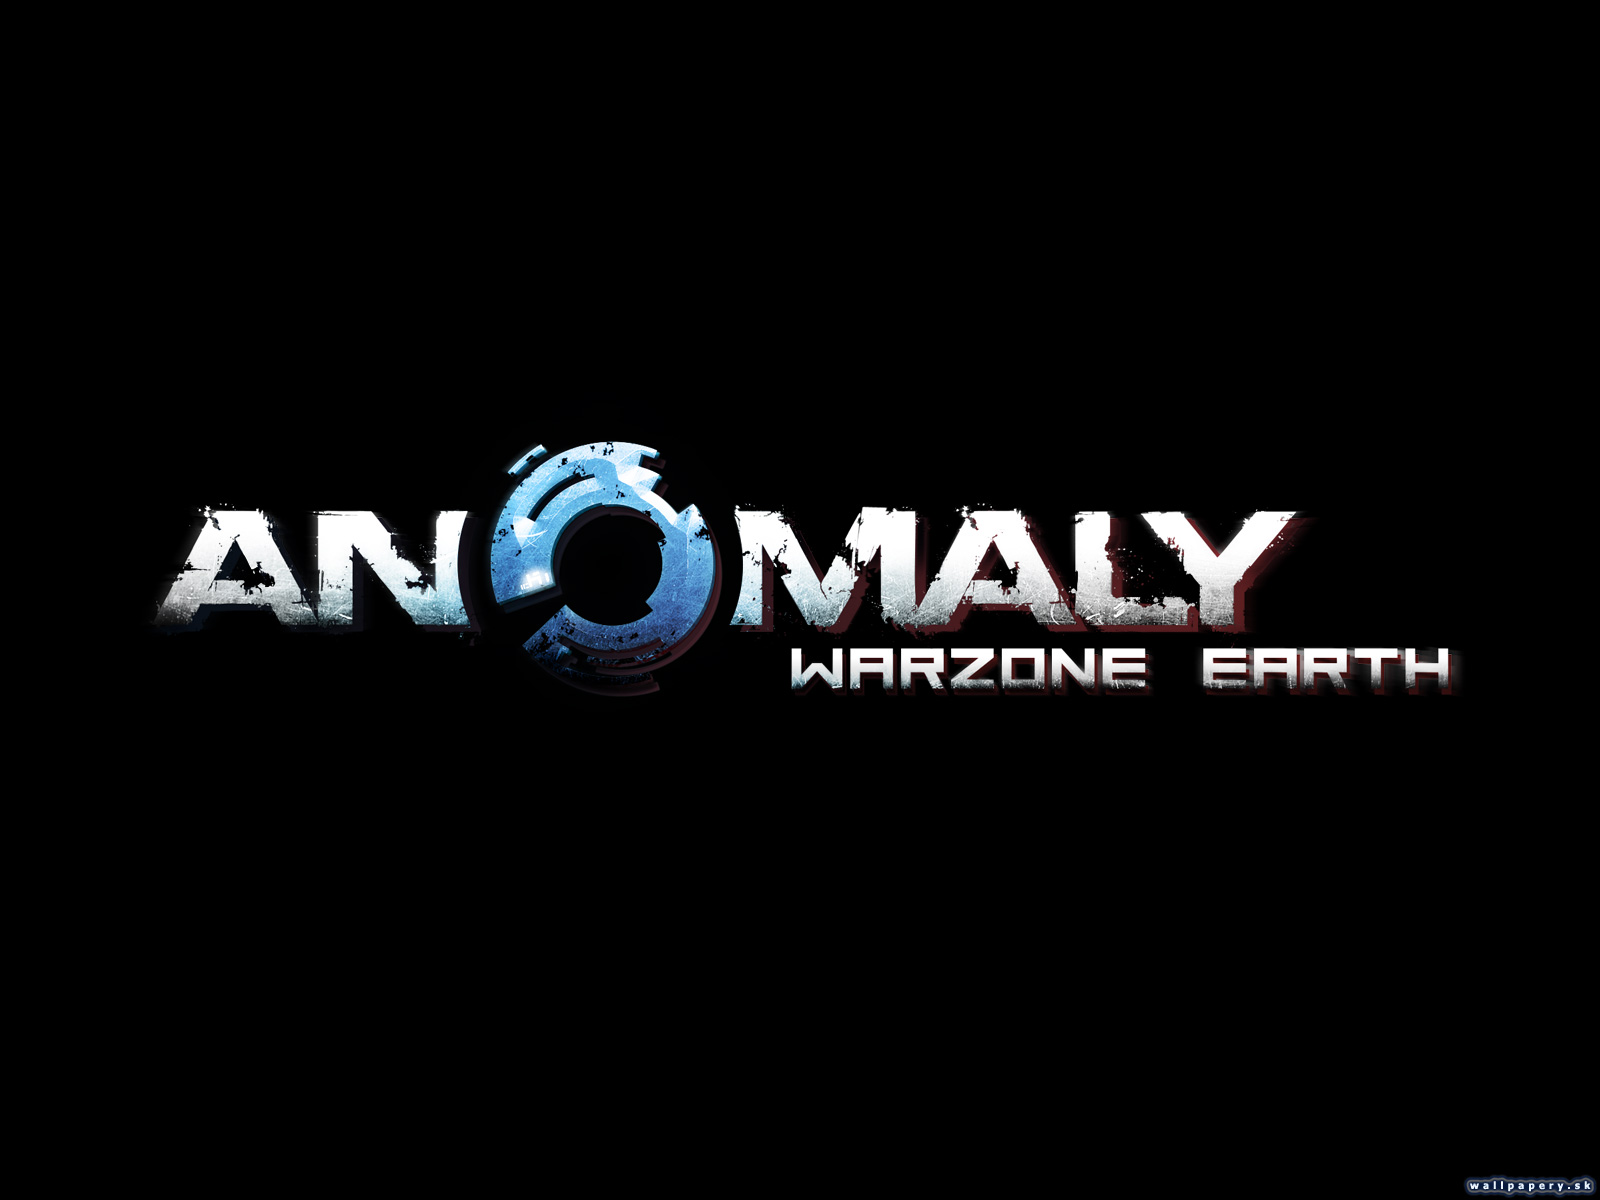 Anomaly: Warzone Earth - wallpaper 3